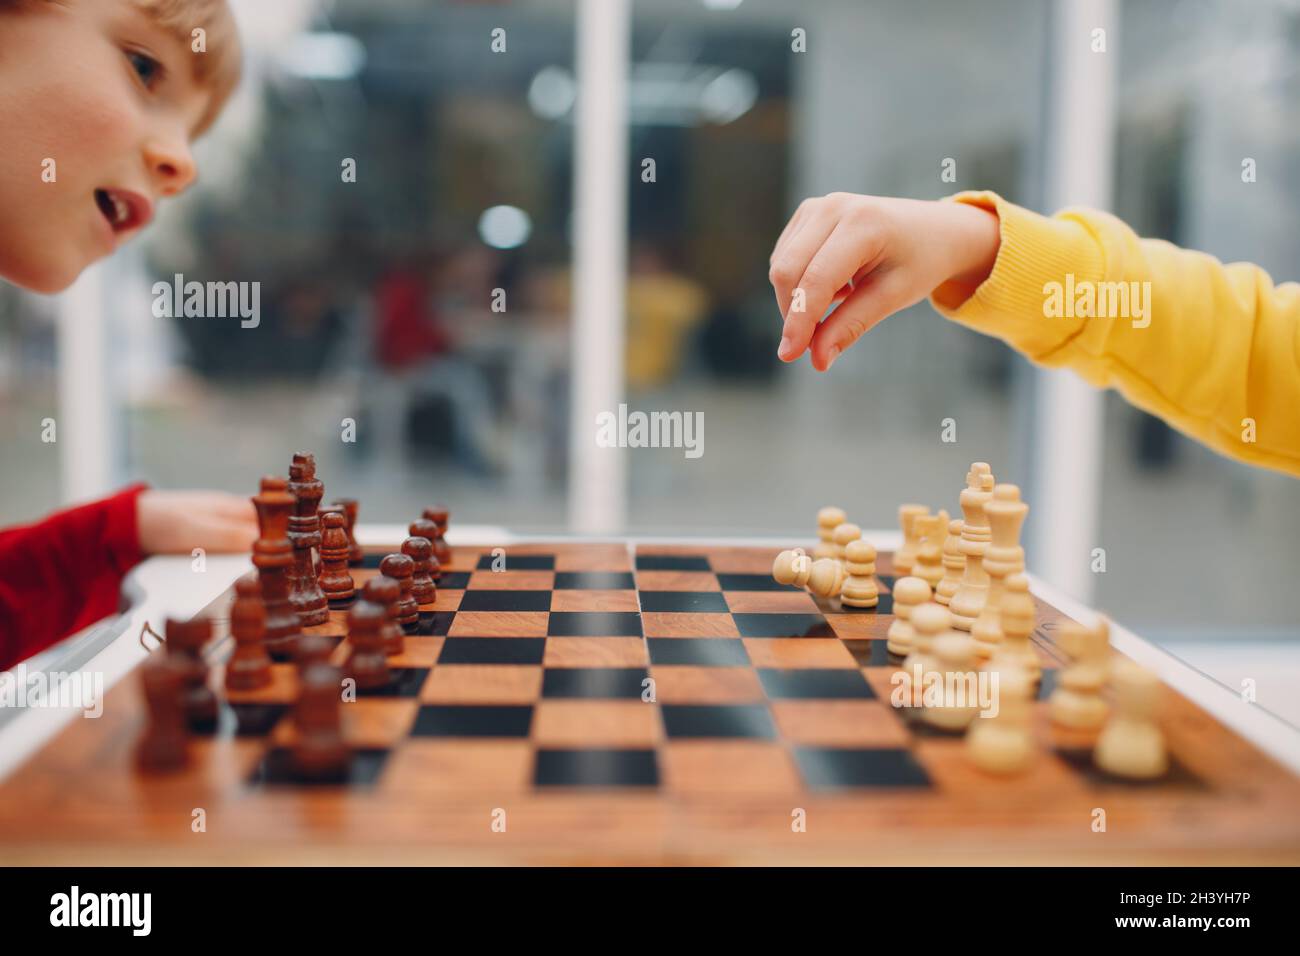 Little kids playing chess at kindergarten or elementary school. Children's chess play. Stock Photo